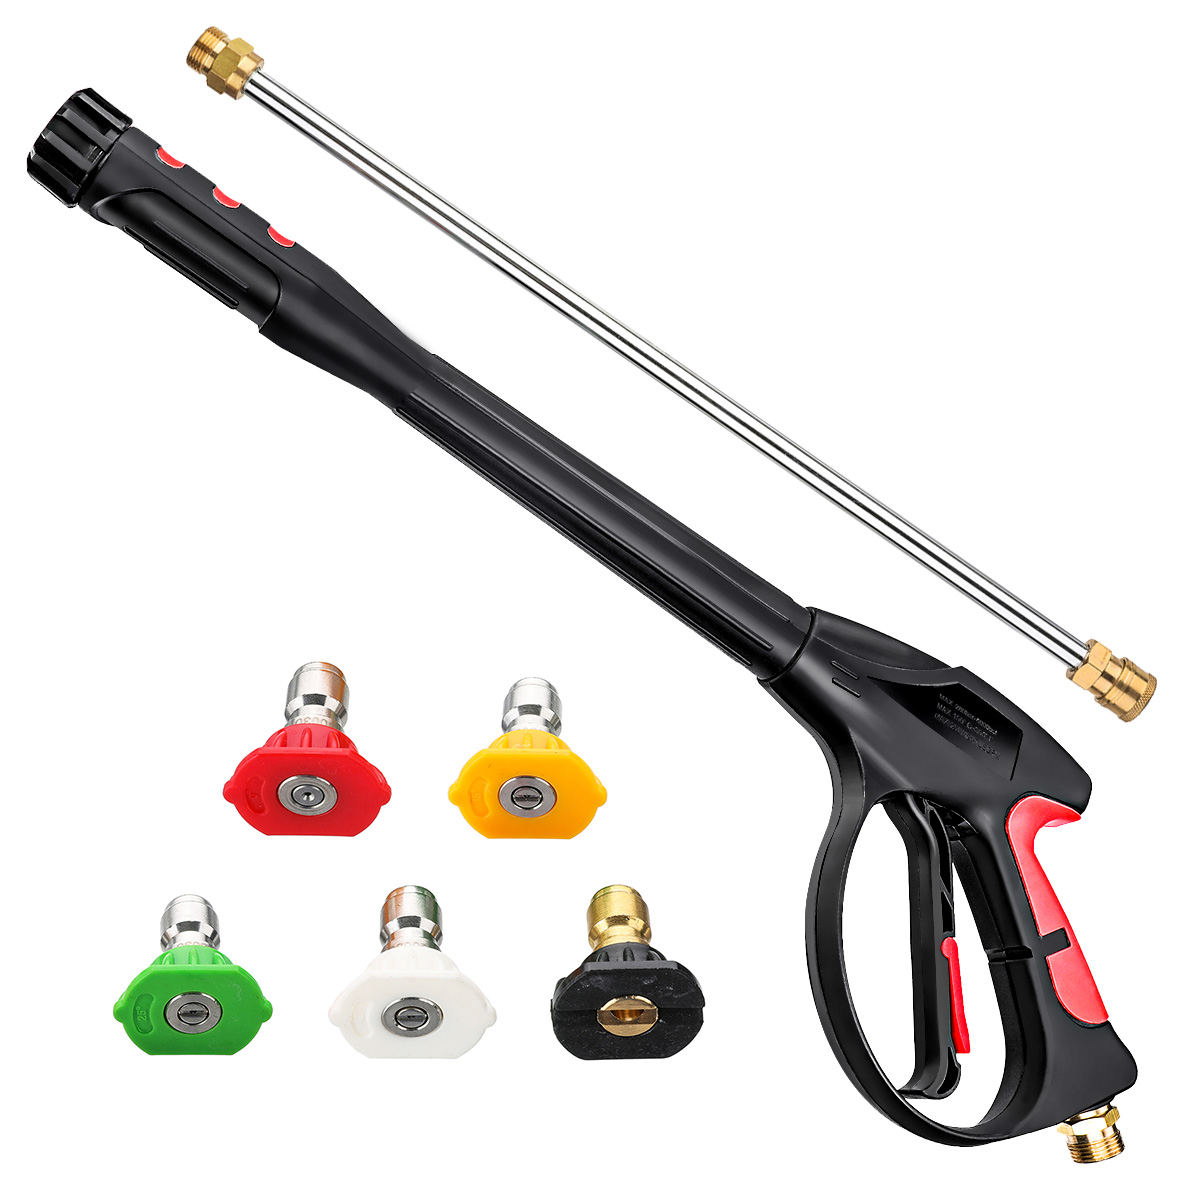 

MATCC Pressure Washer 4000 PSI Power Spray Car Wash with 19 inch Extendable Wand 1/4'' Quick Connect Nozzles and 5 Nozzle Tips for Car High Pr